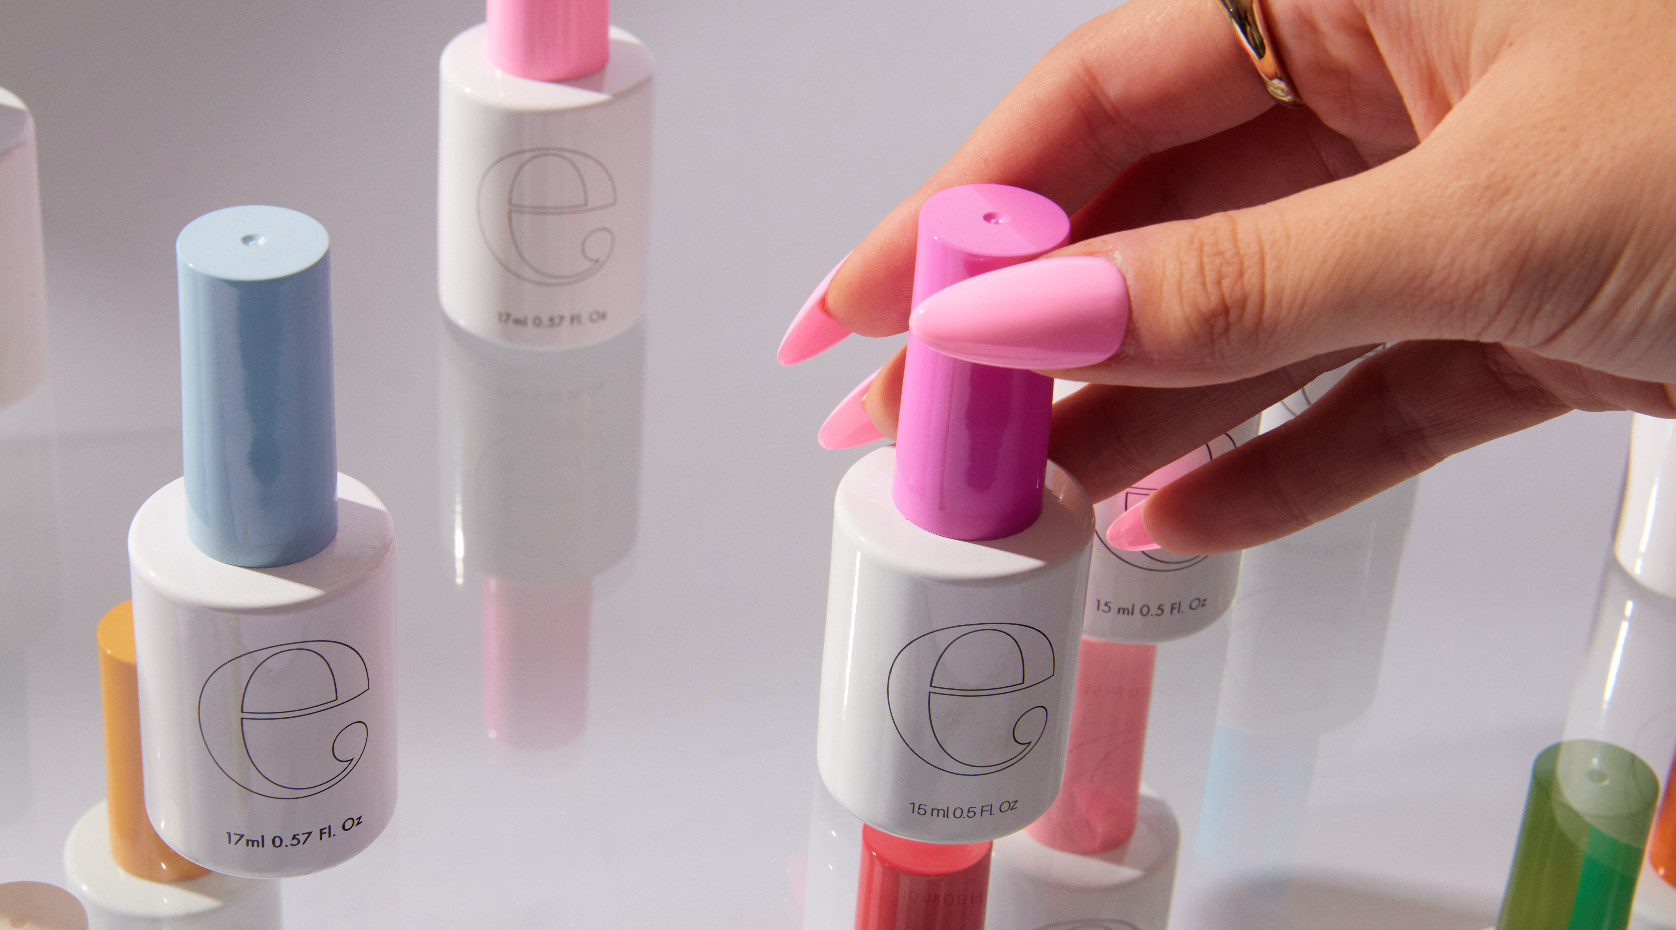 Why our 2in1 Base Coat & Extension Gel Adhesive Is your At Home Manicure Kit Staple